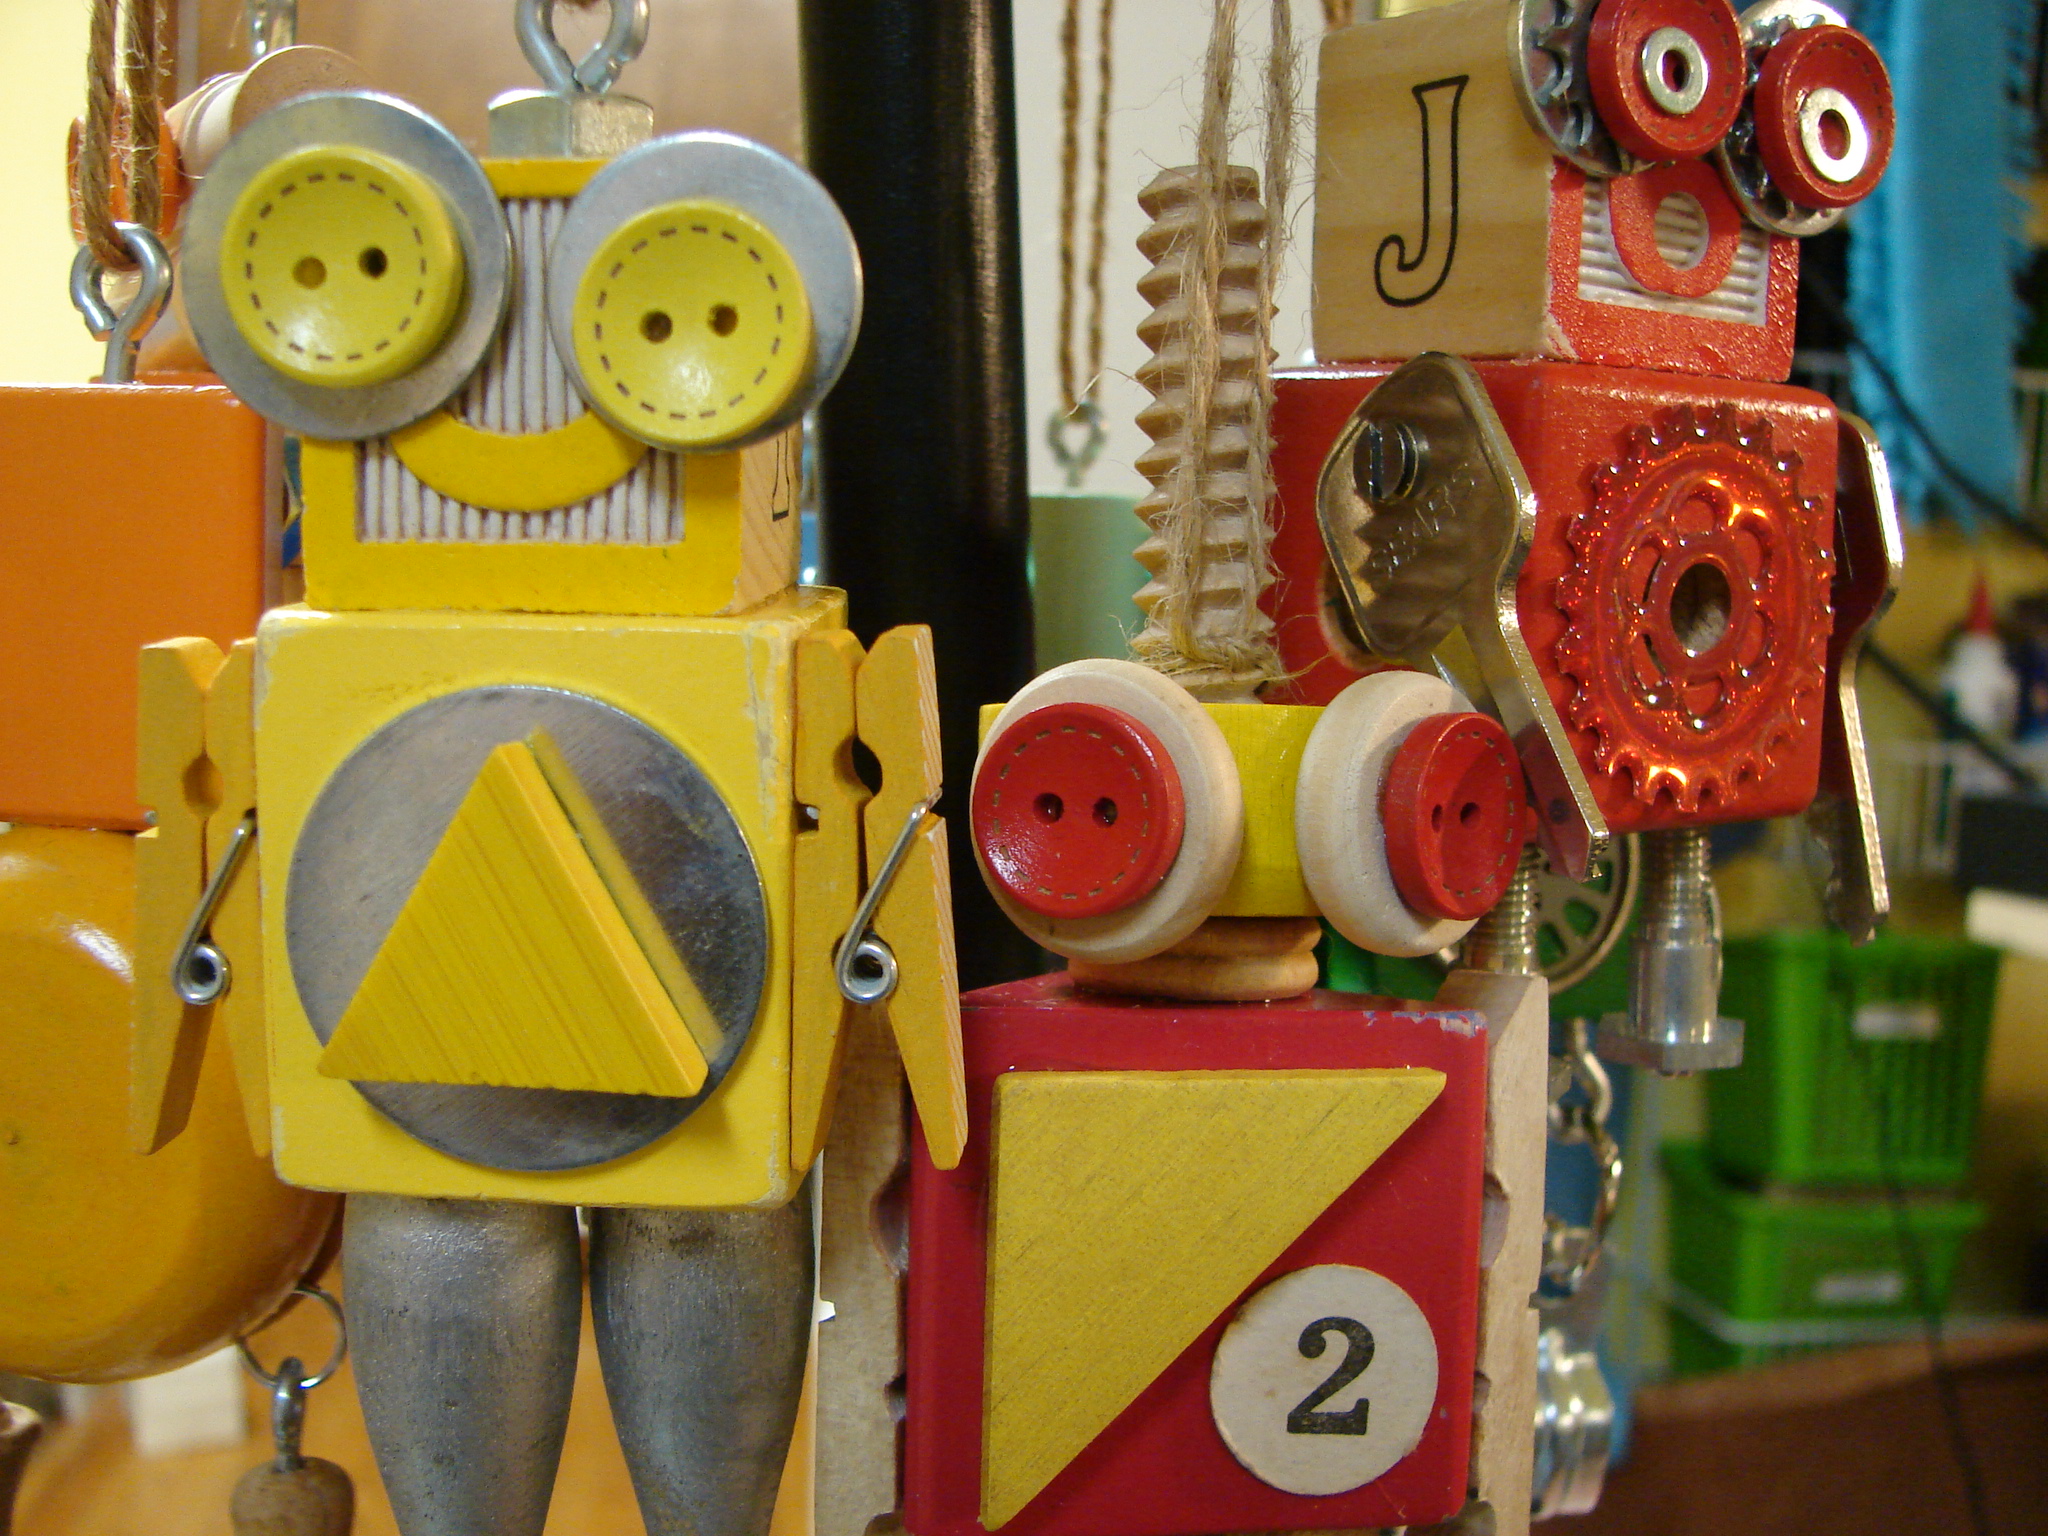 Robot Ornaments by Trilby Works